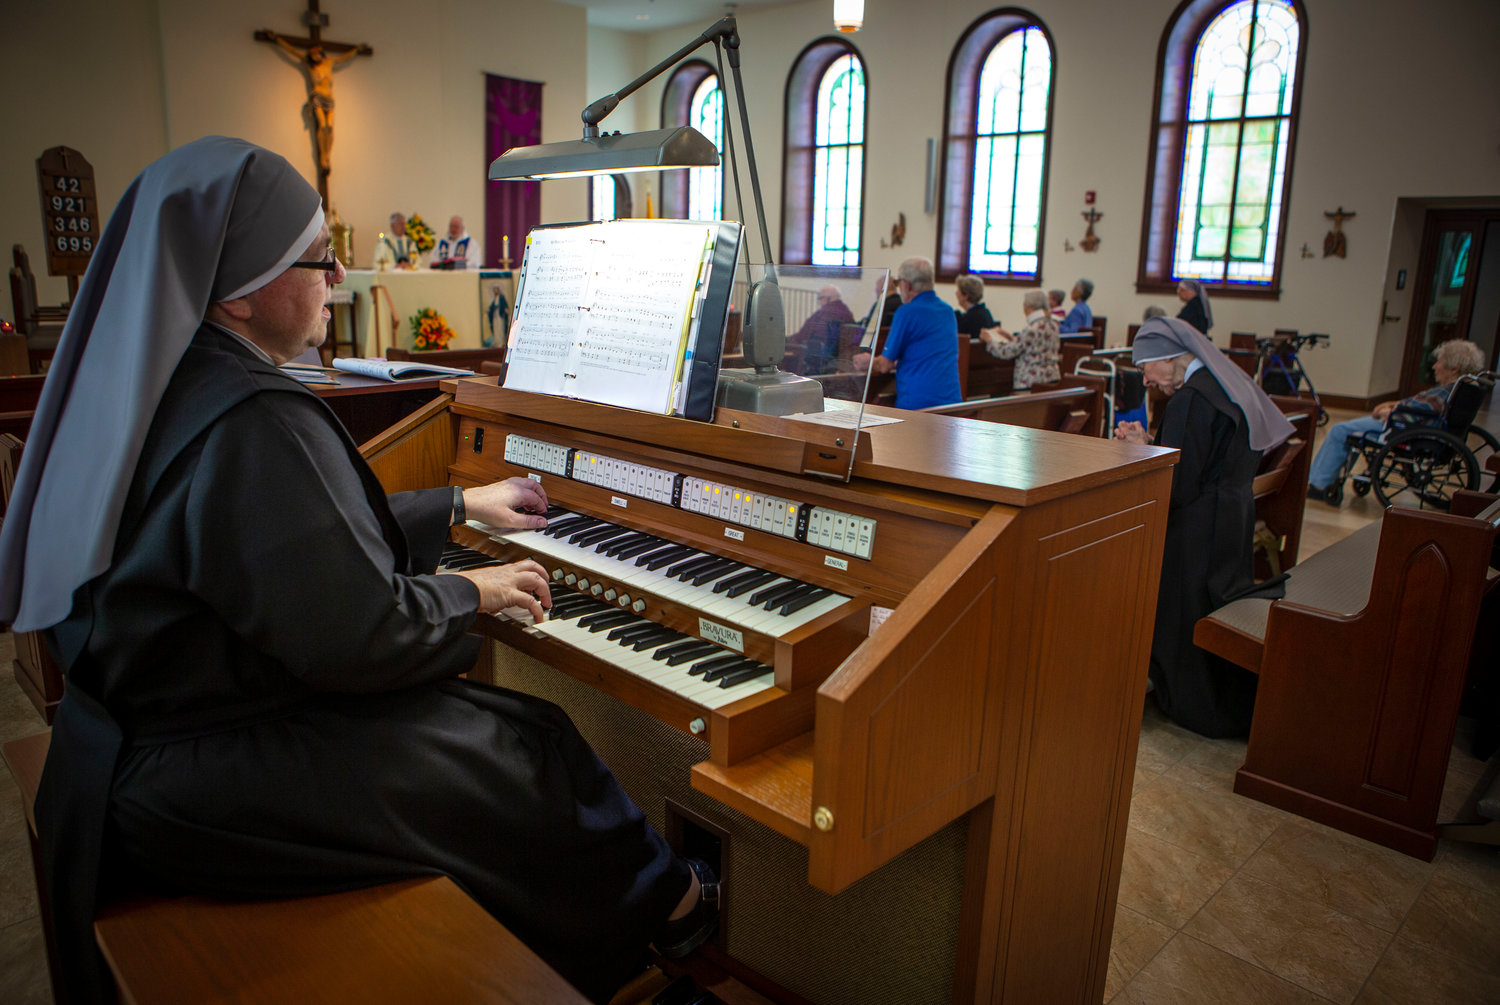 Sister Constance Veit, a Little Sister of the Poor, plays the organ during a March 25, 2019, Mass at the Jeanne Jugan Residence for senior care in Washington. Sister Constance is considered a spiritual mother by many of the residents, who said they will honor her on Mother’s Day.